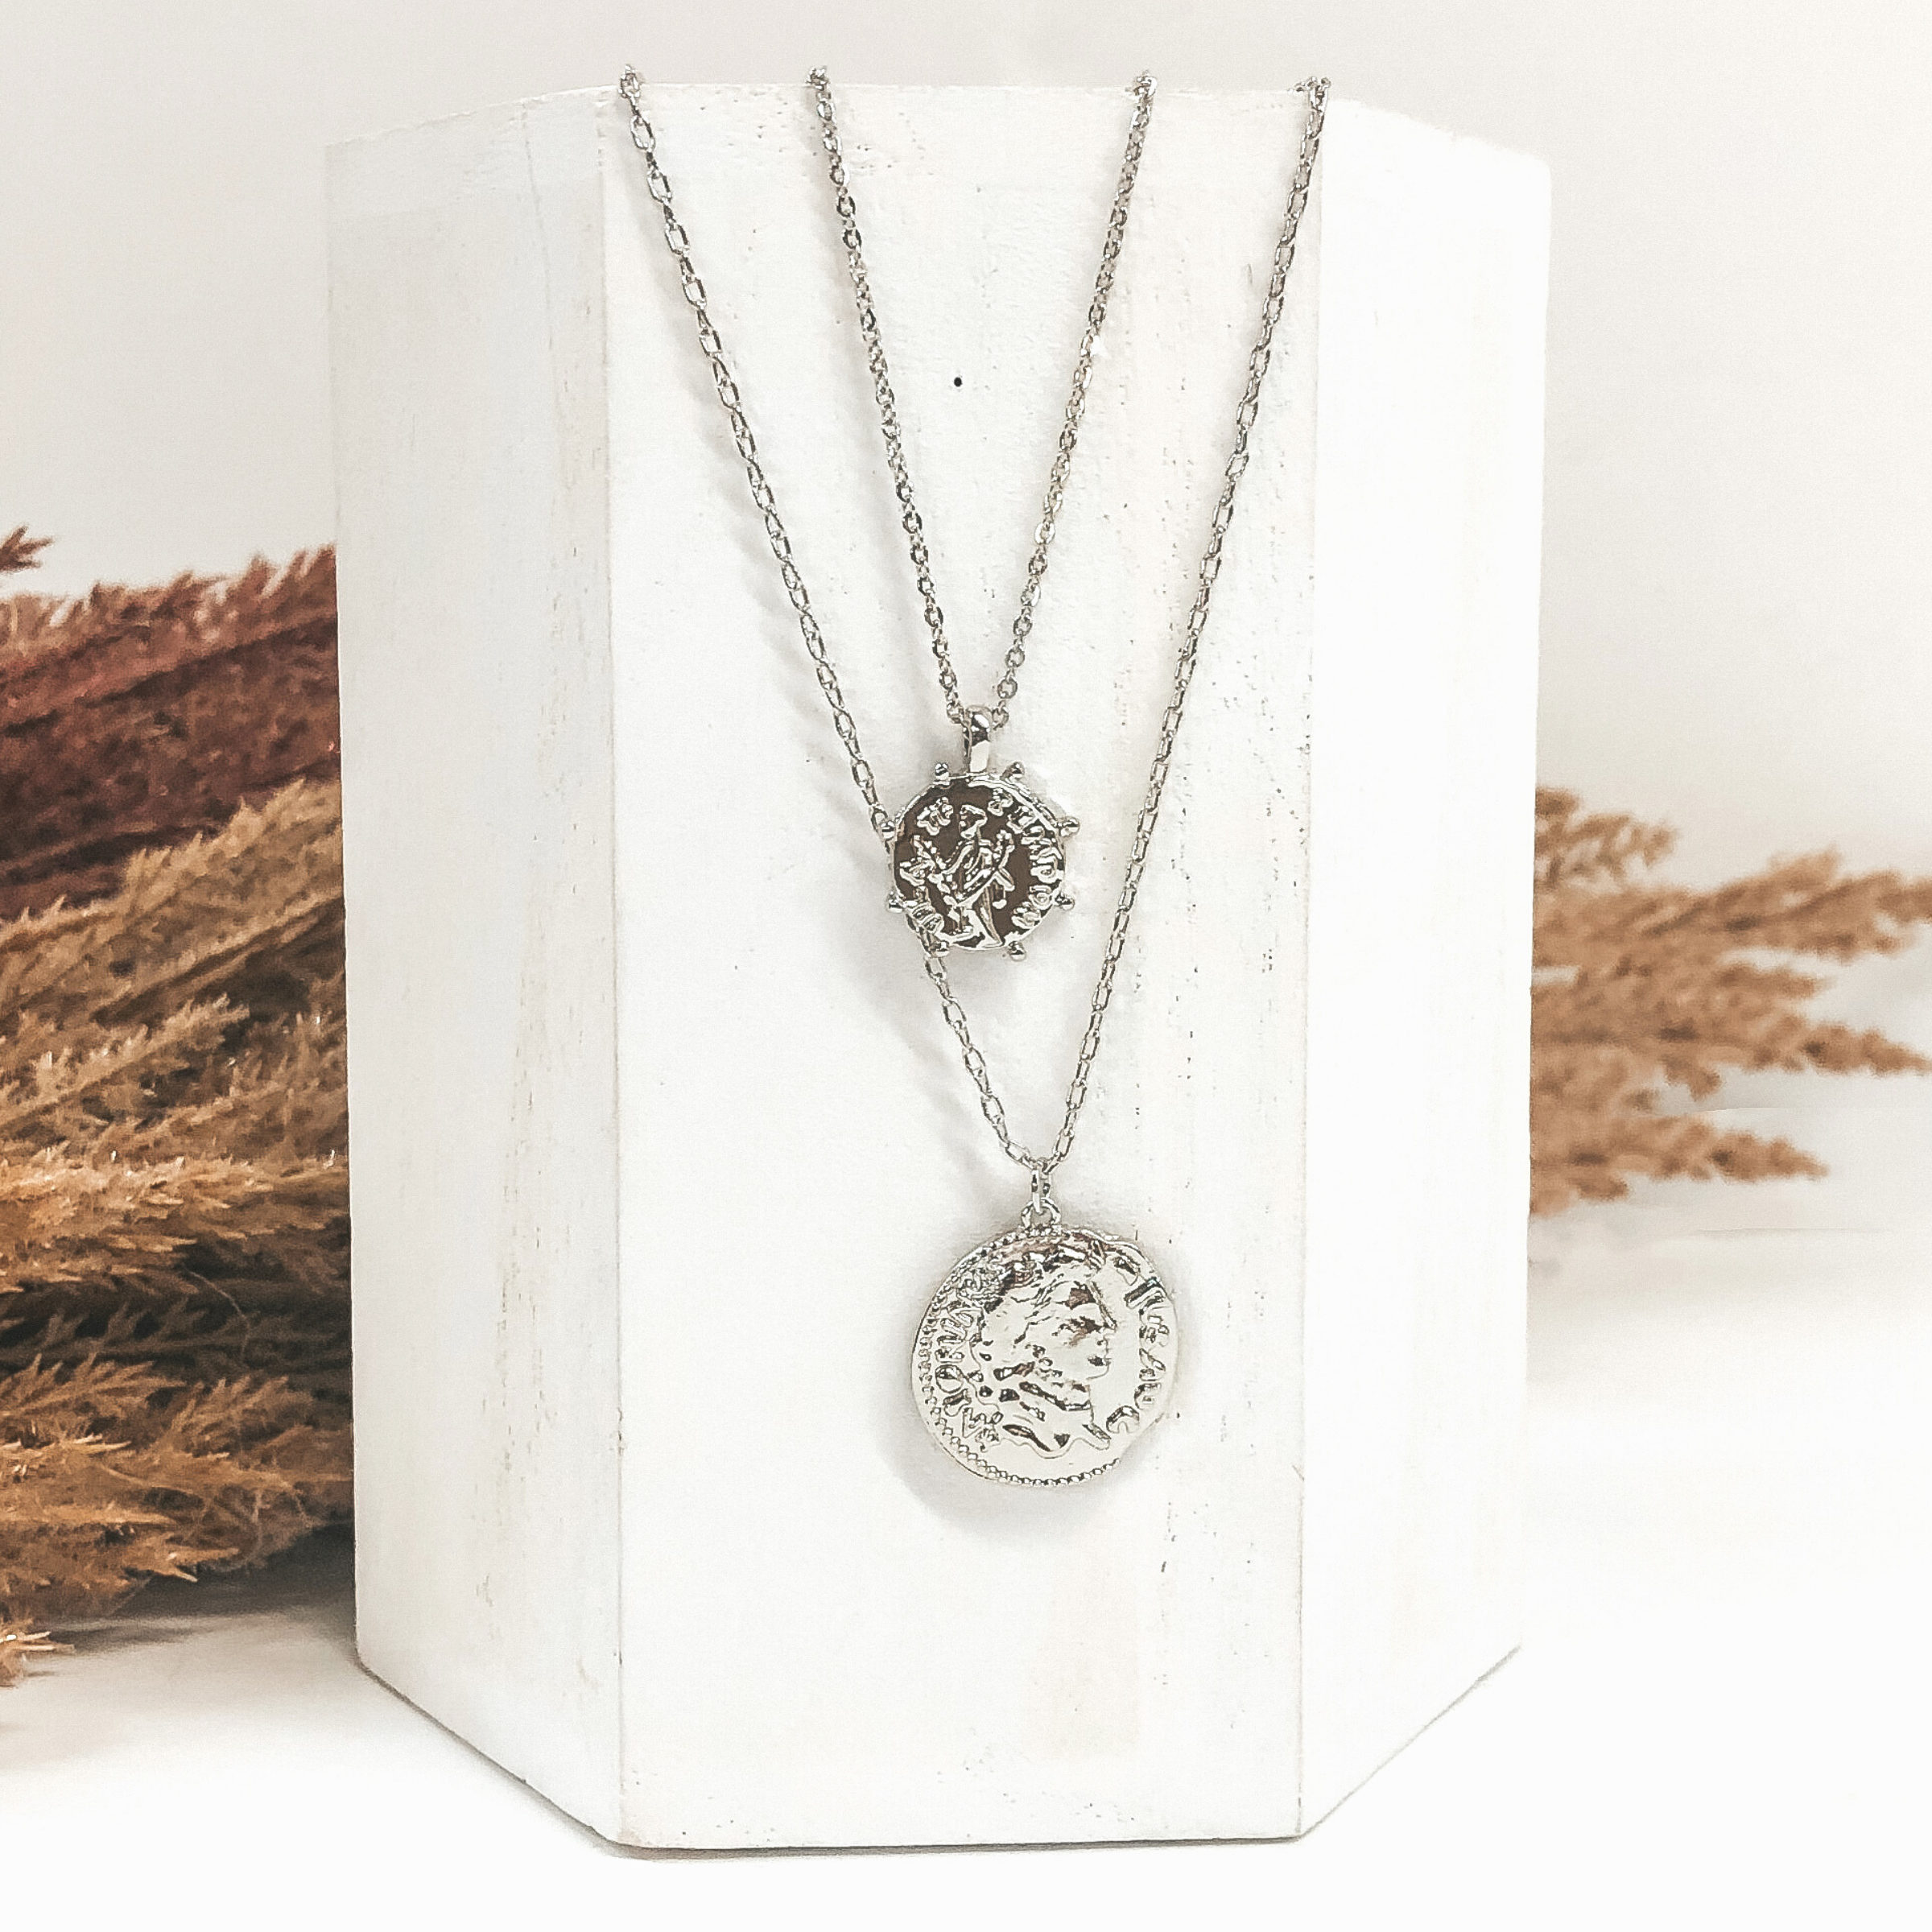 Two Strand Chained Necklace in Silver with Two Silver Coins - Giddy Up Glamour Boutique